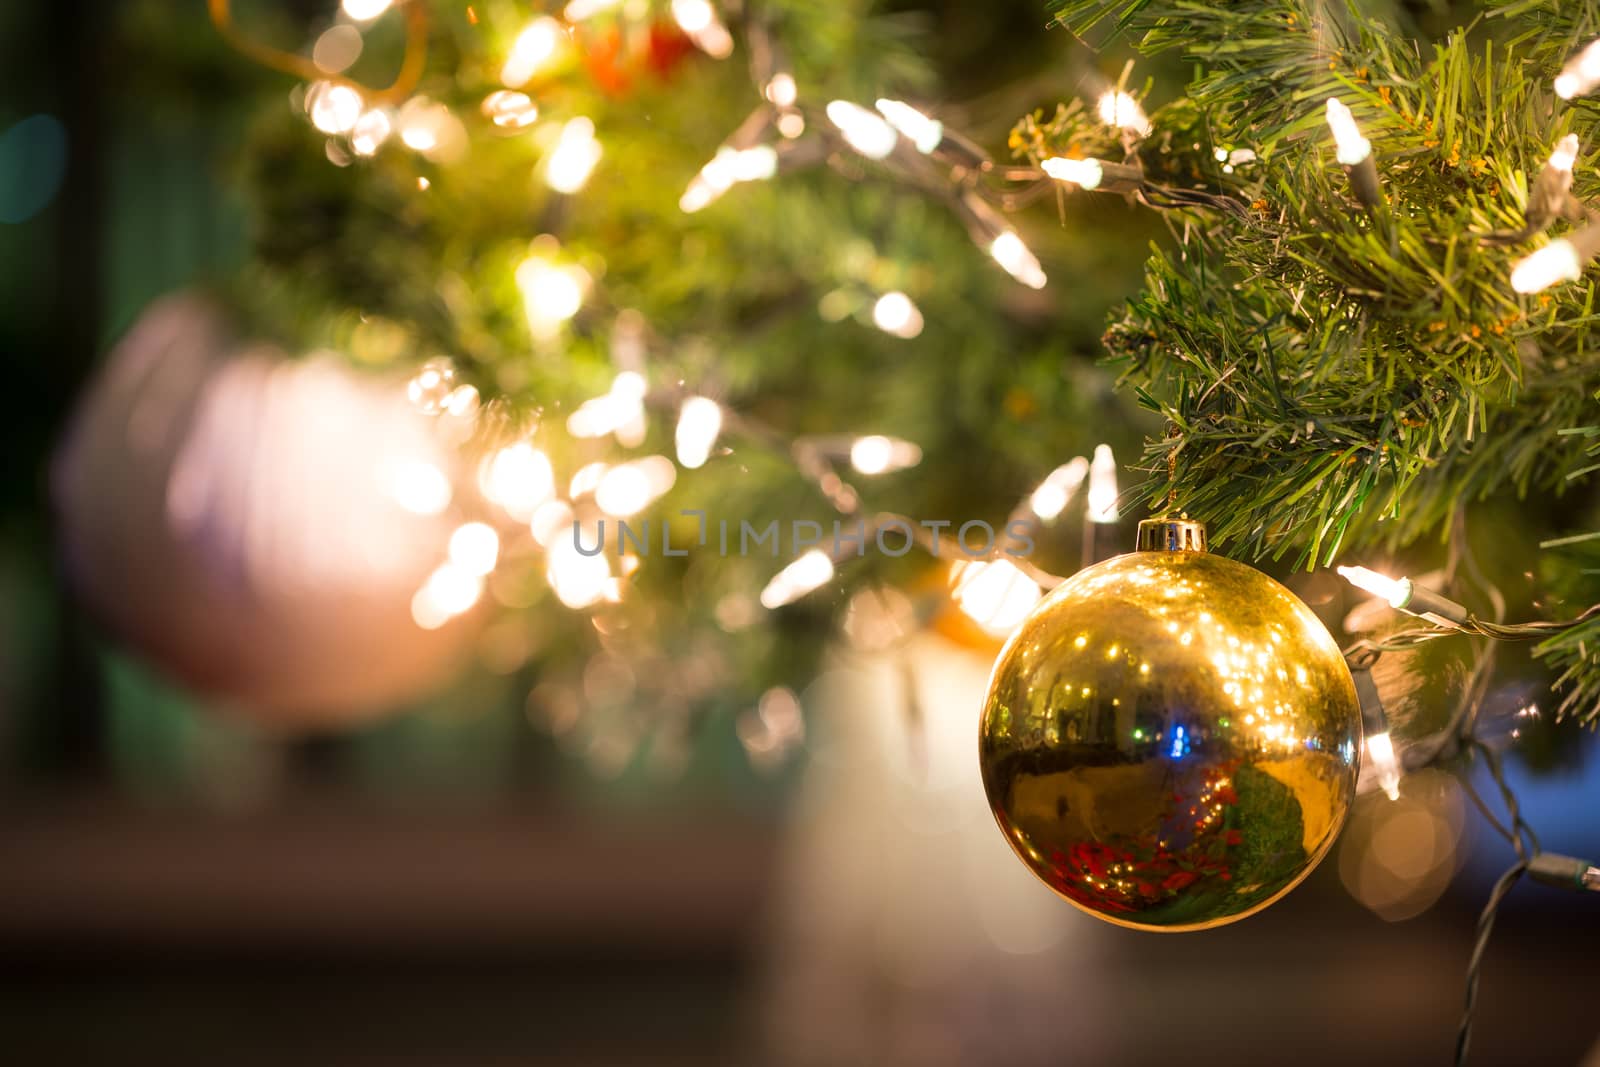 Christmas ball on the tree for decoration by Alicephoto